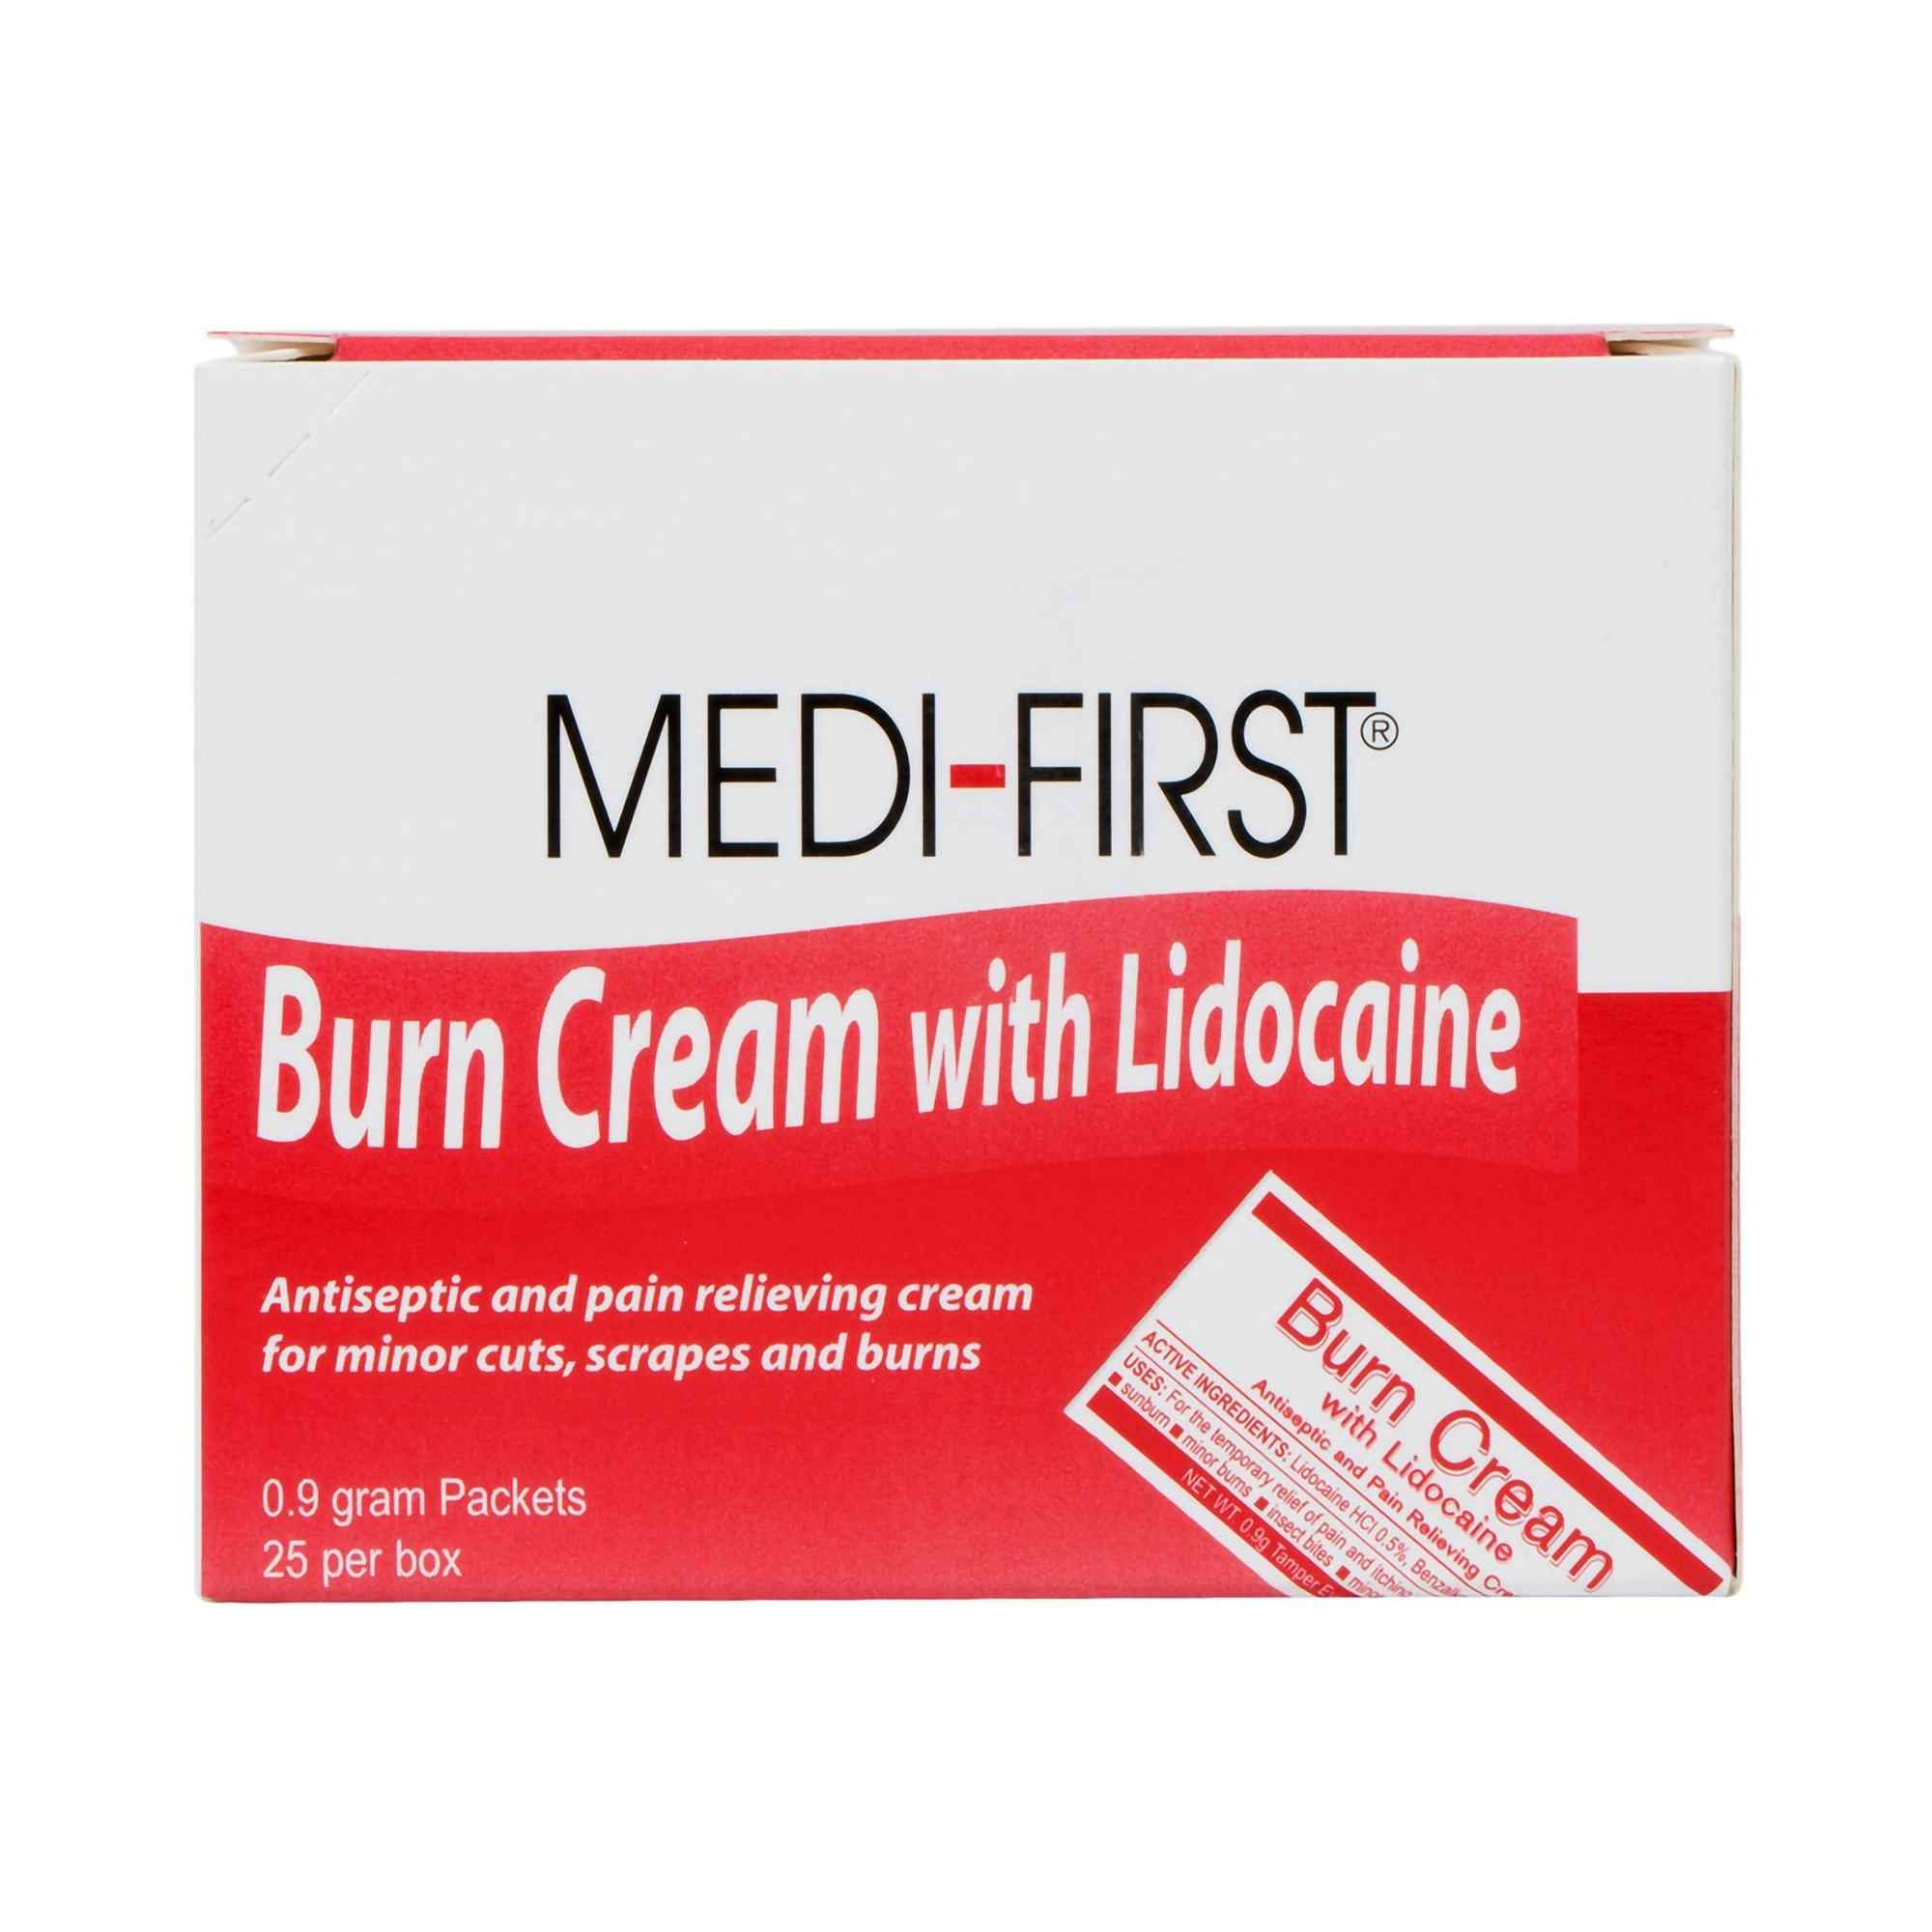 Medi-First Burn Cream with Lidocaine, 0.9g Packets, 26073, Box of 25